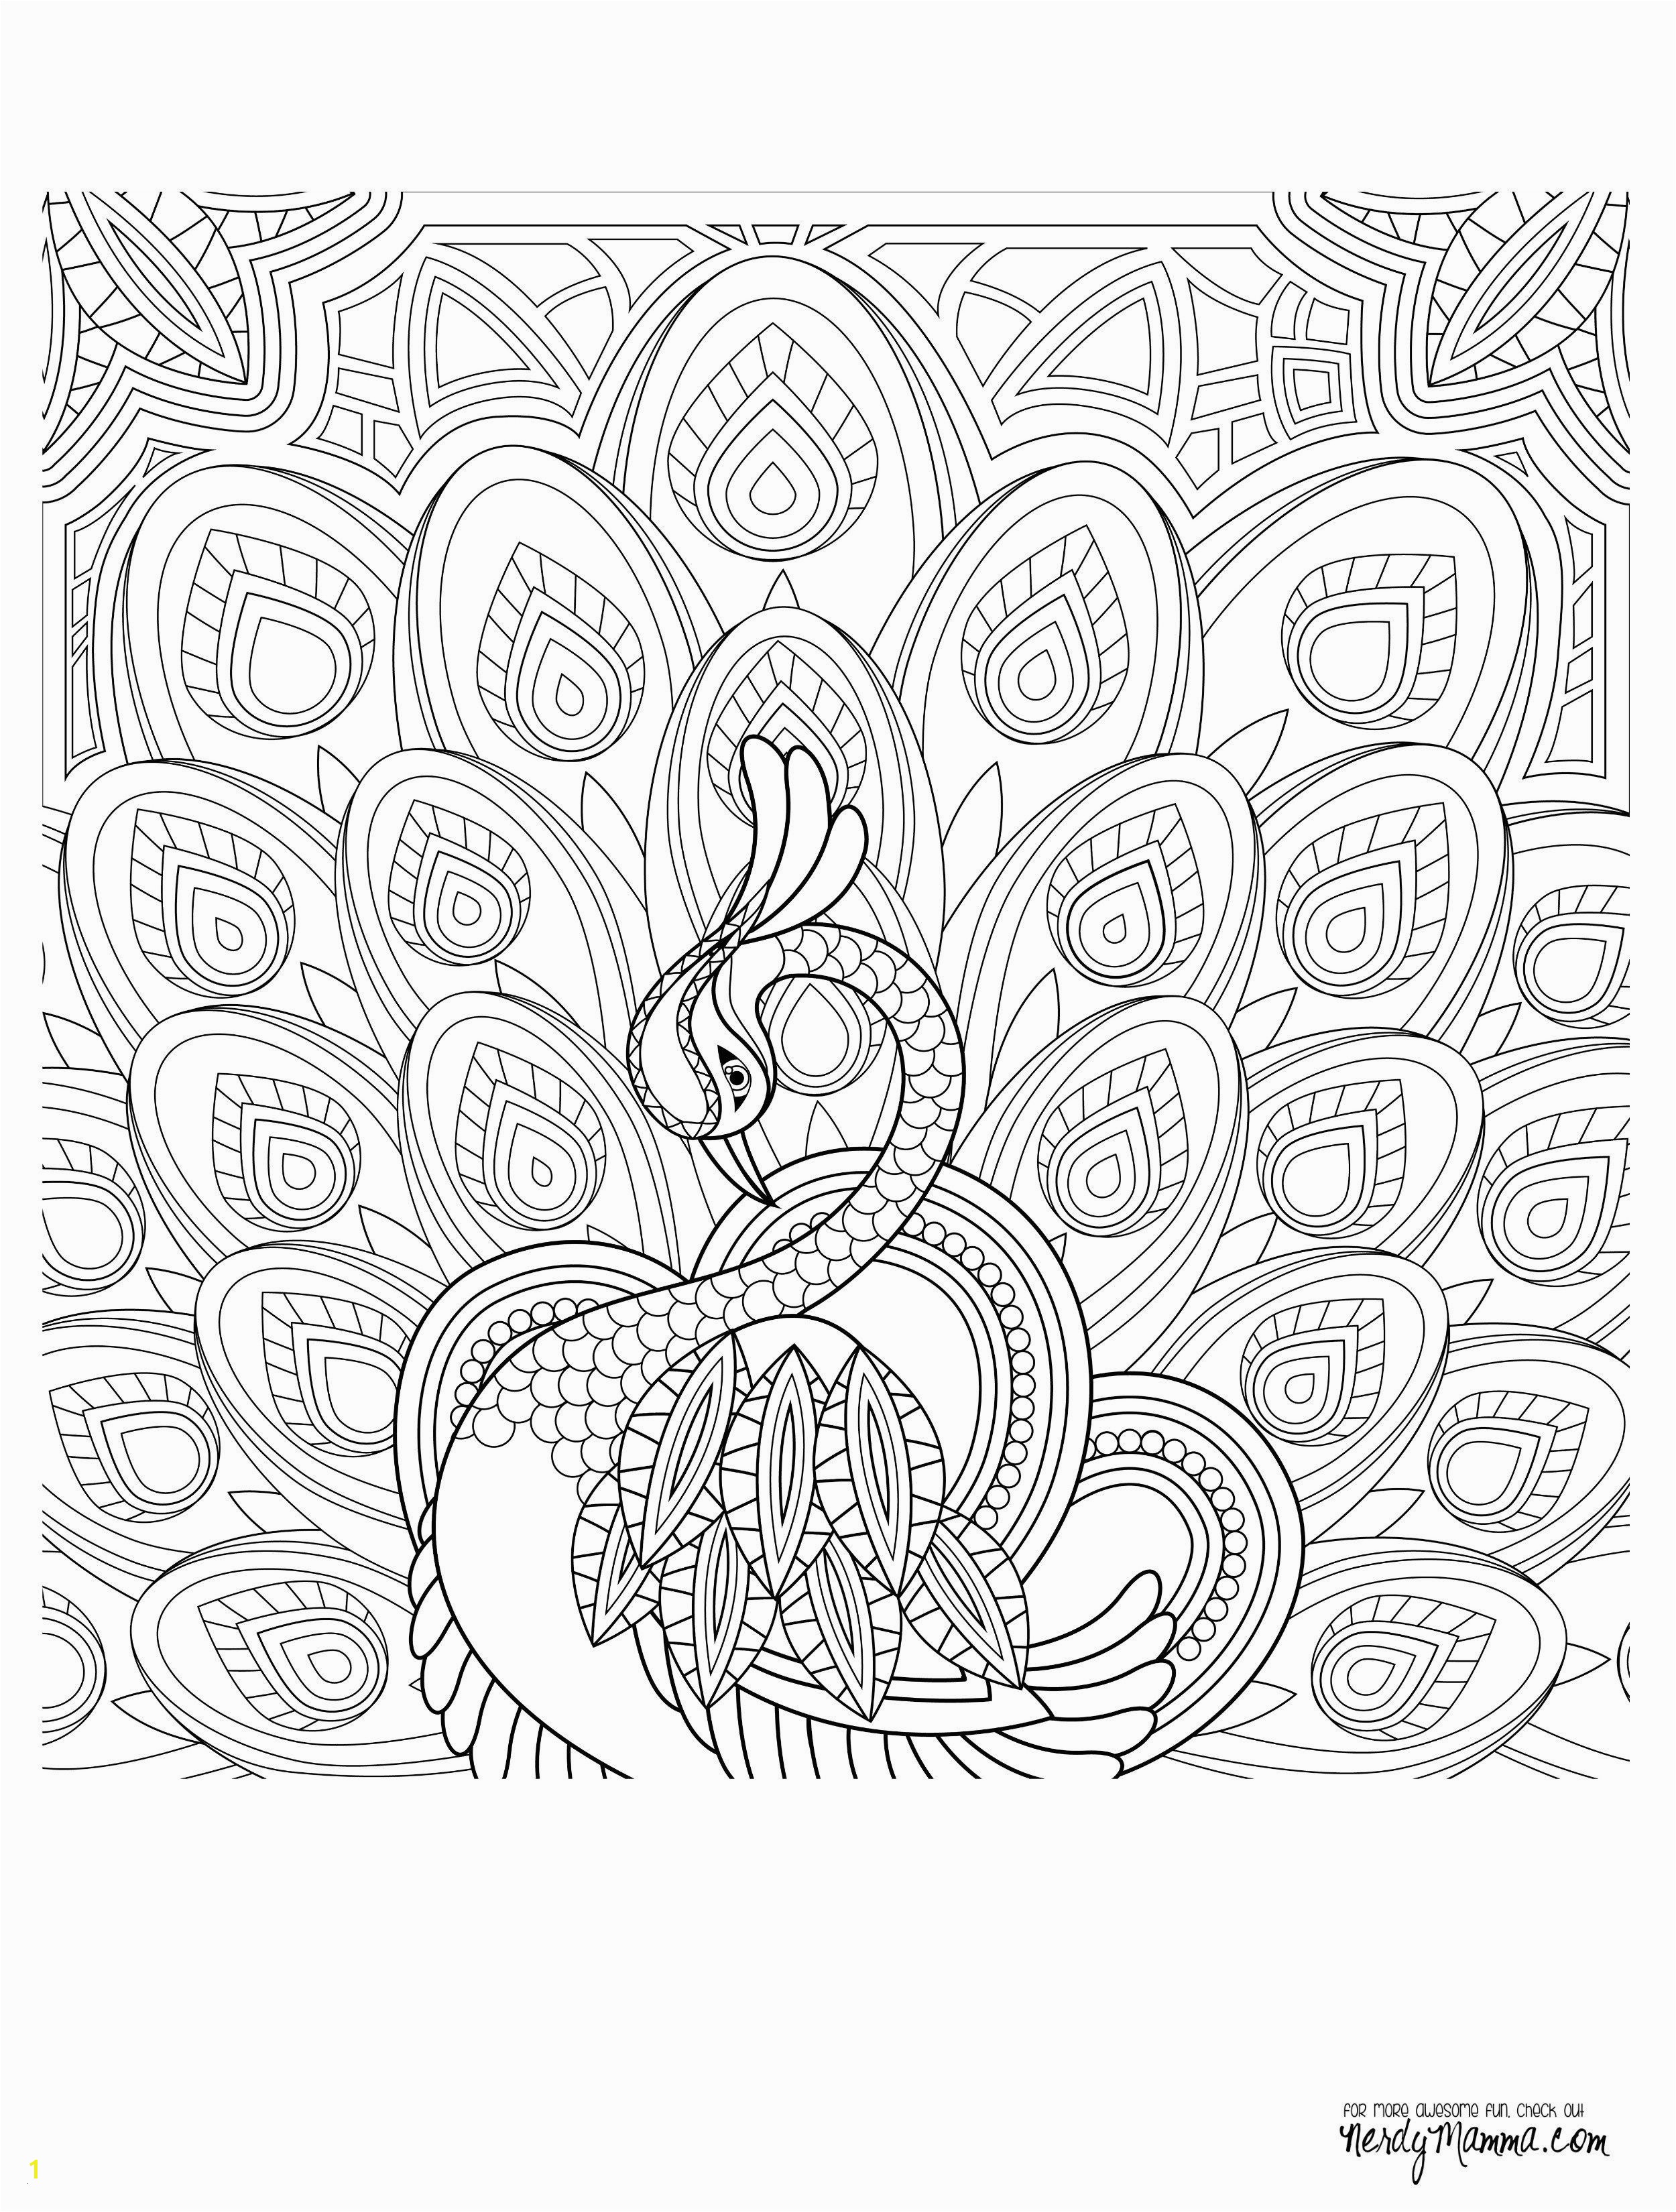 Fun In the Sun Coloring Pages Elf Coloring Pages Gallery thephotosync